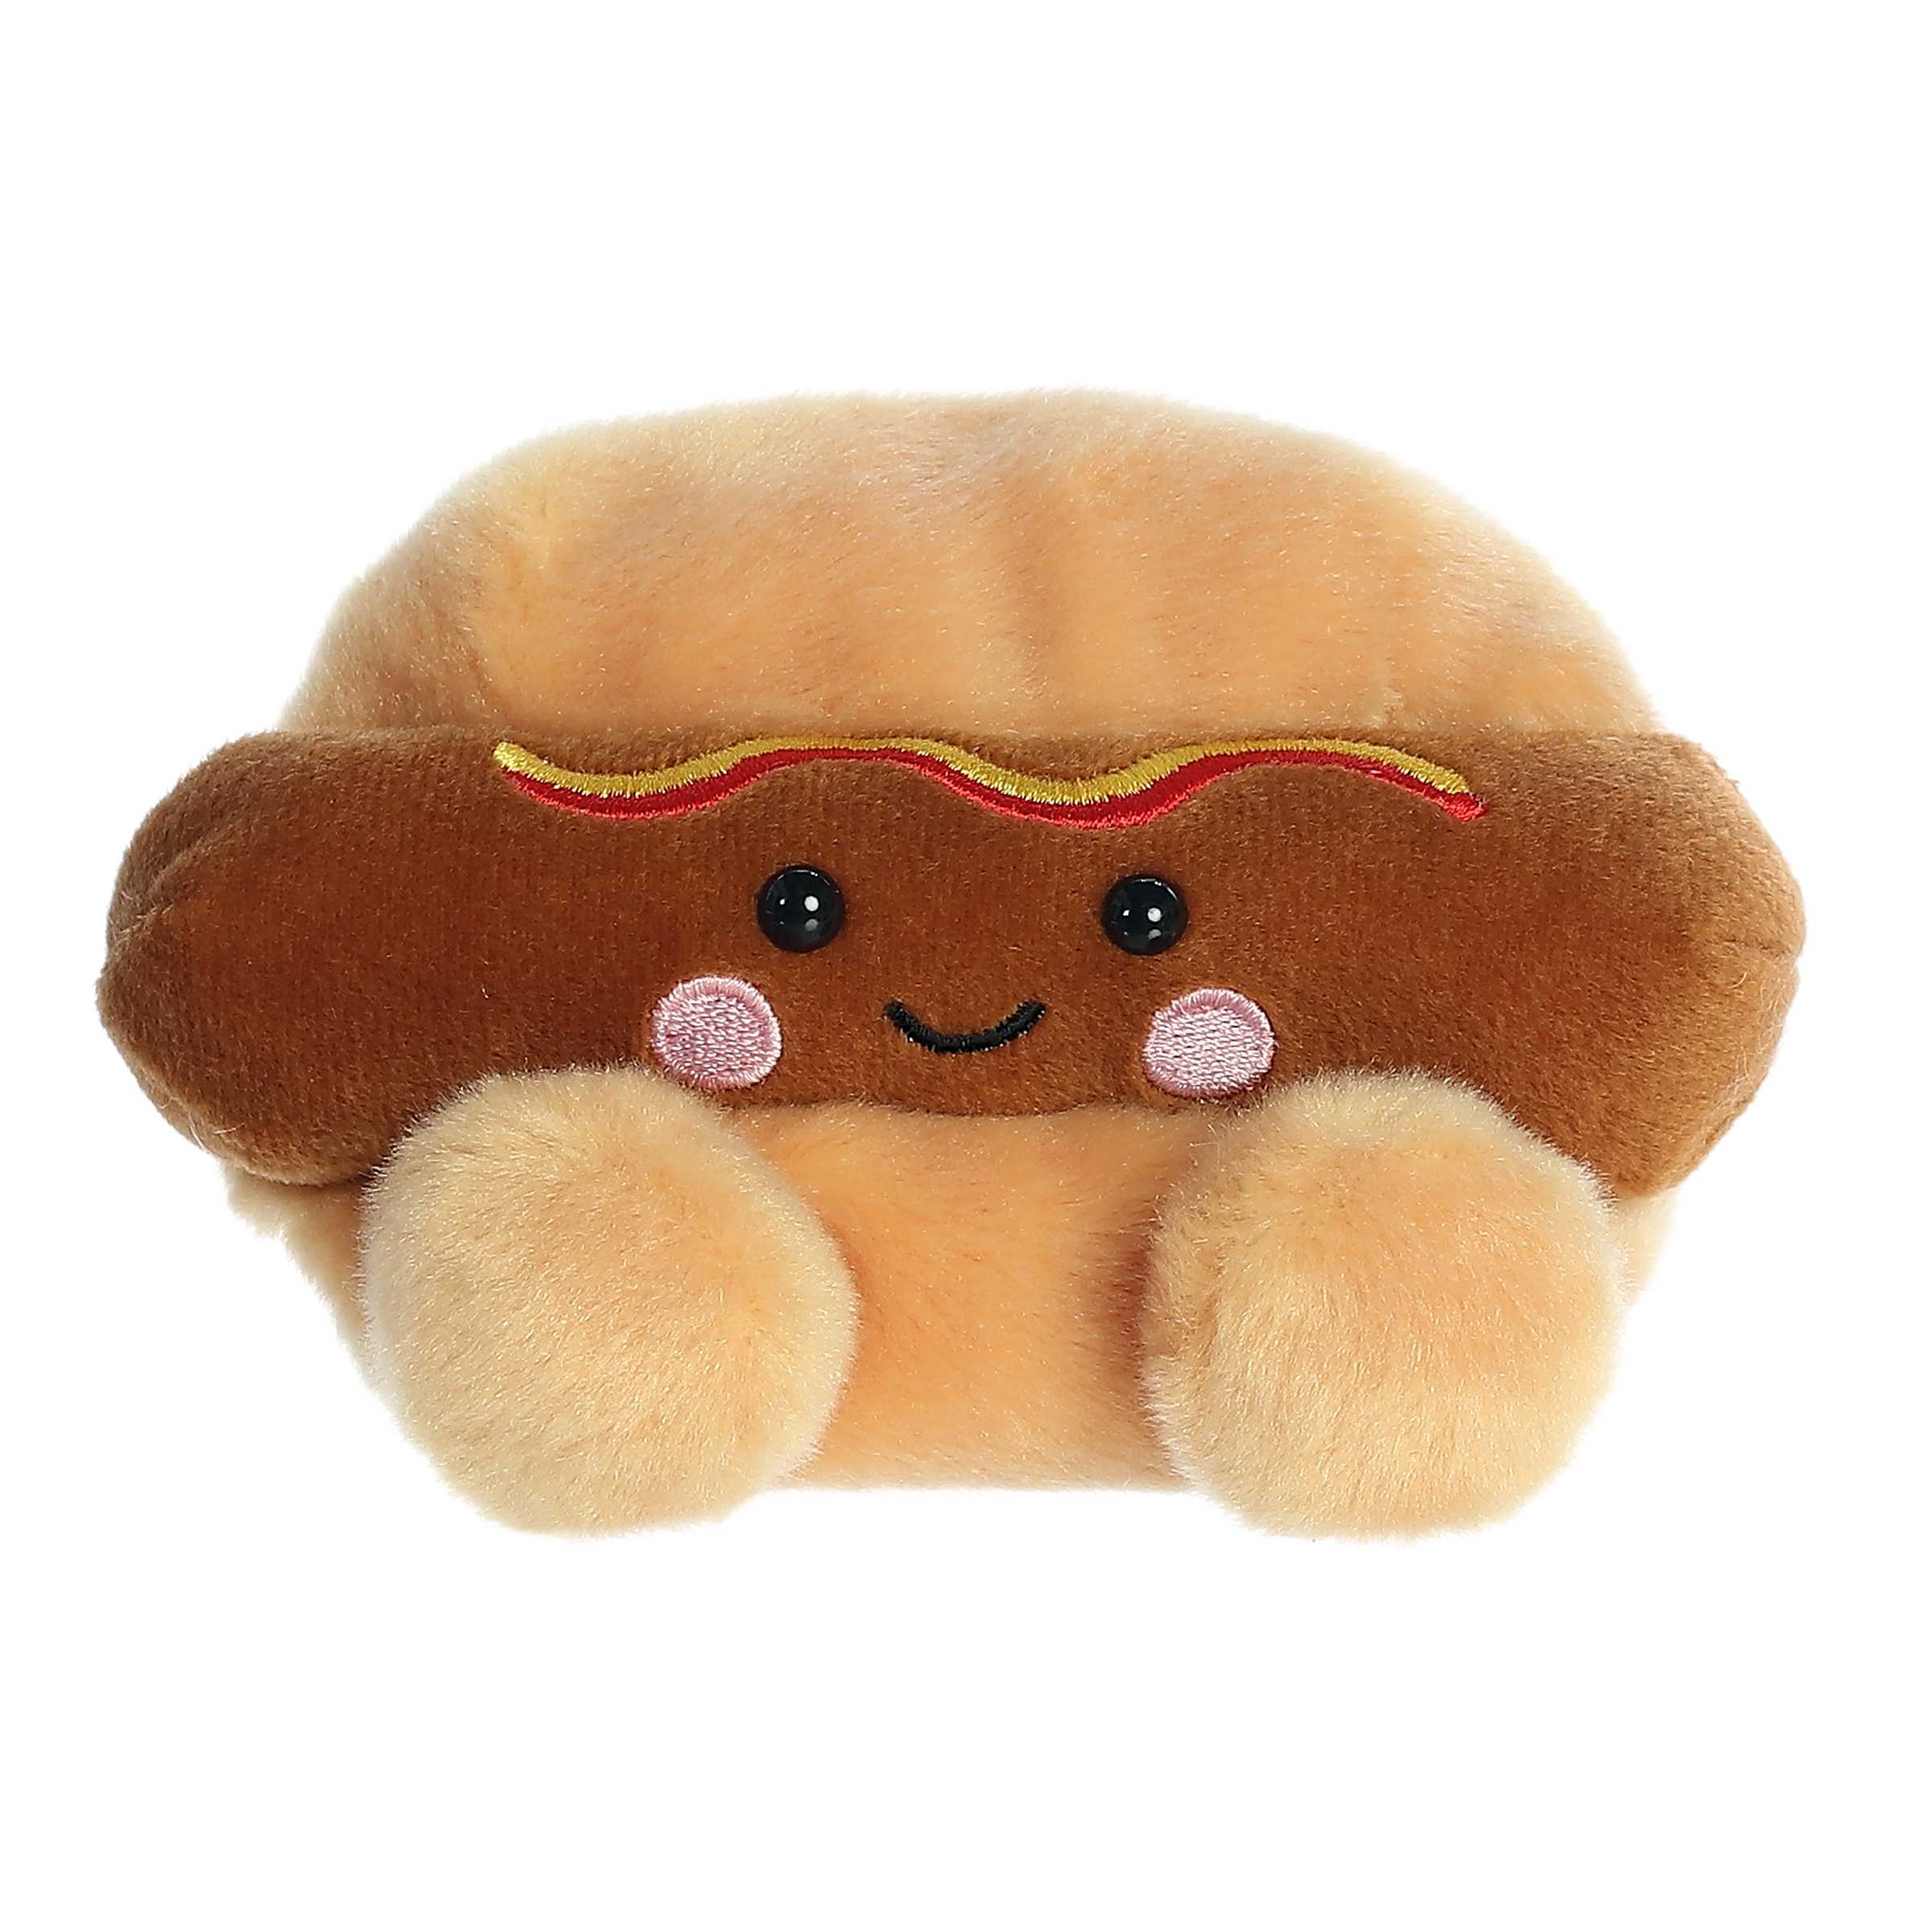 An adorable hot dog plush with a tan bun and round feet and a dark brown hot dog that blushes and smiles